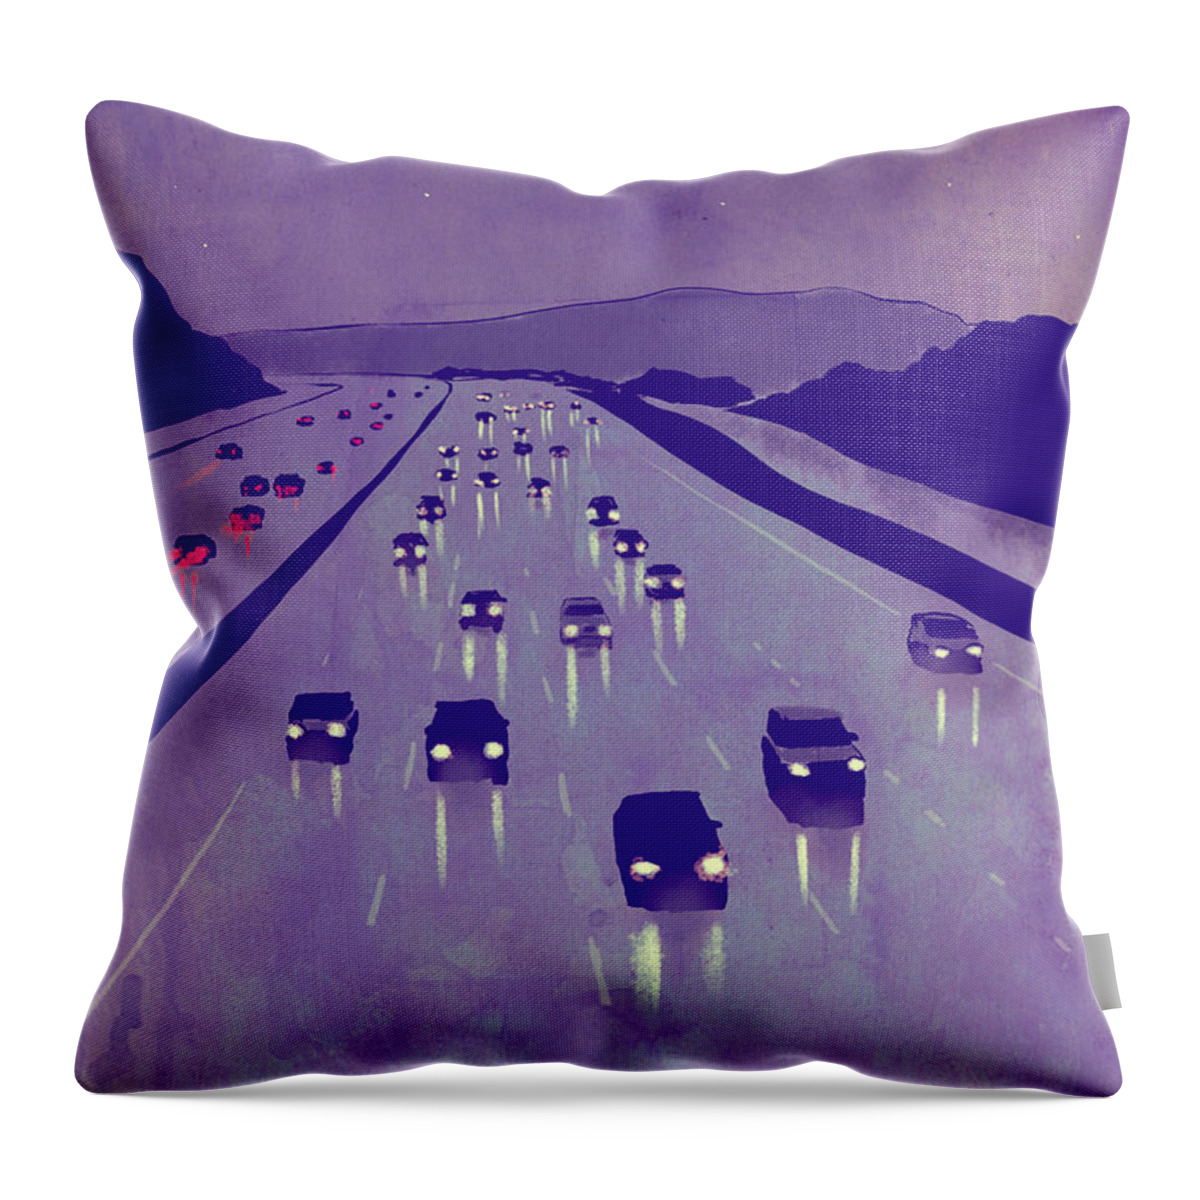 Storyboard Artist Throw Pillow featuring the drawing Nightscape 01 by Giuseppe Cristiano